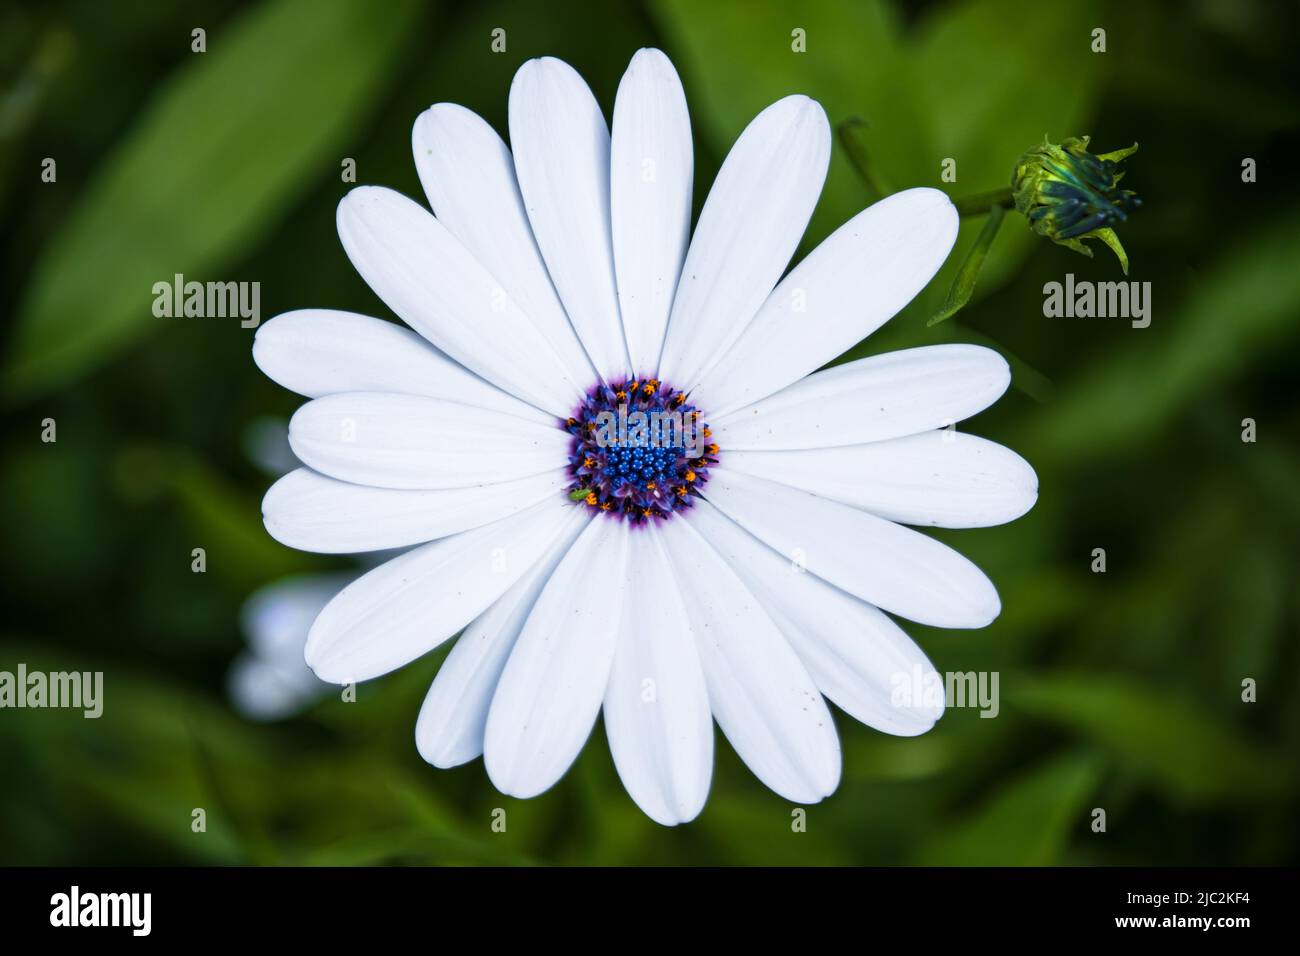 Blue eyed African white daisy, Dimorphotheca ecklonis, on a green background with a tiny green aphid on the blue discs, summer, Pennsylvania Stock Photo